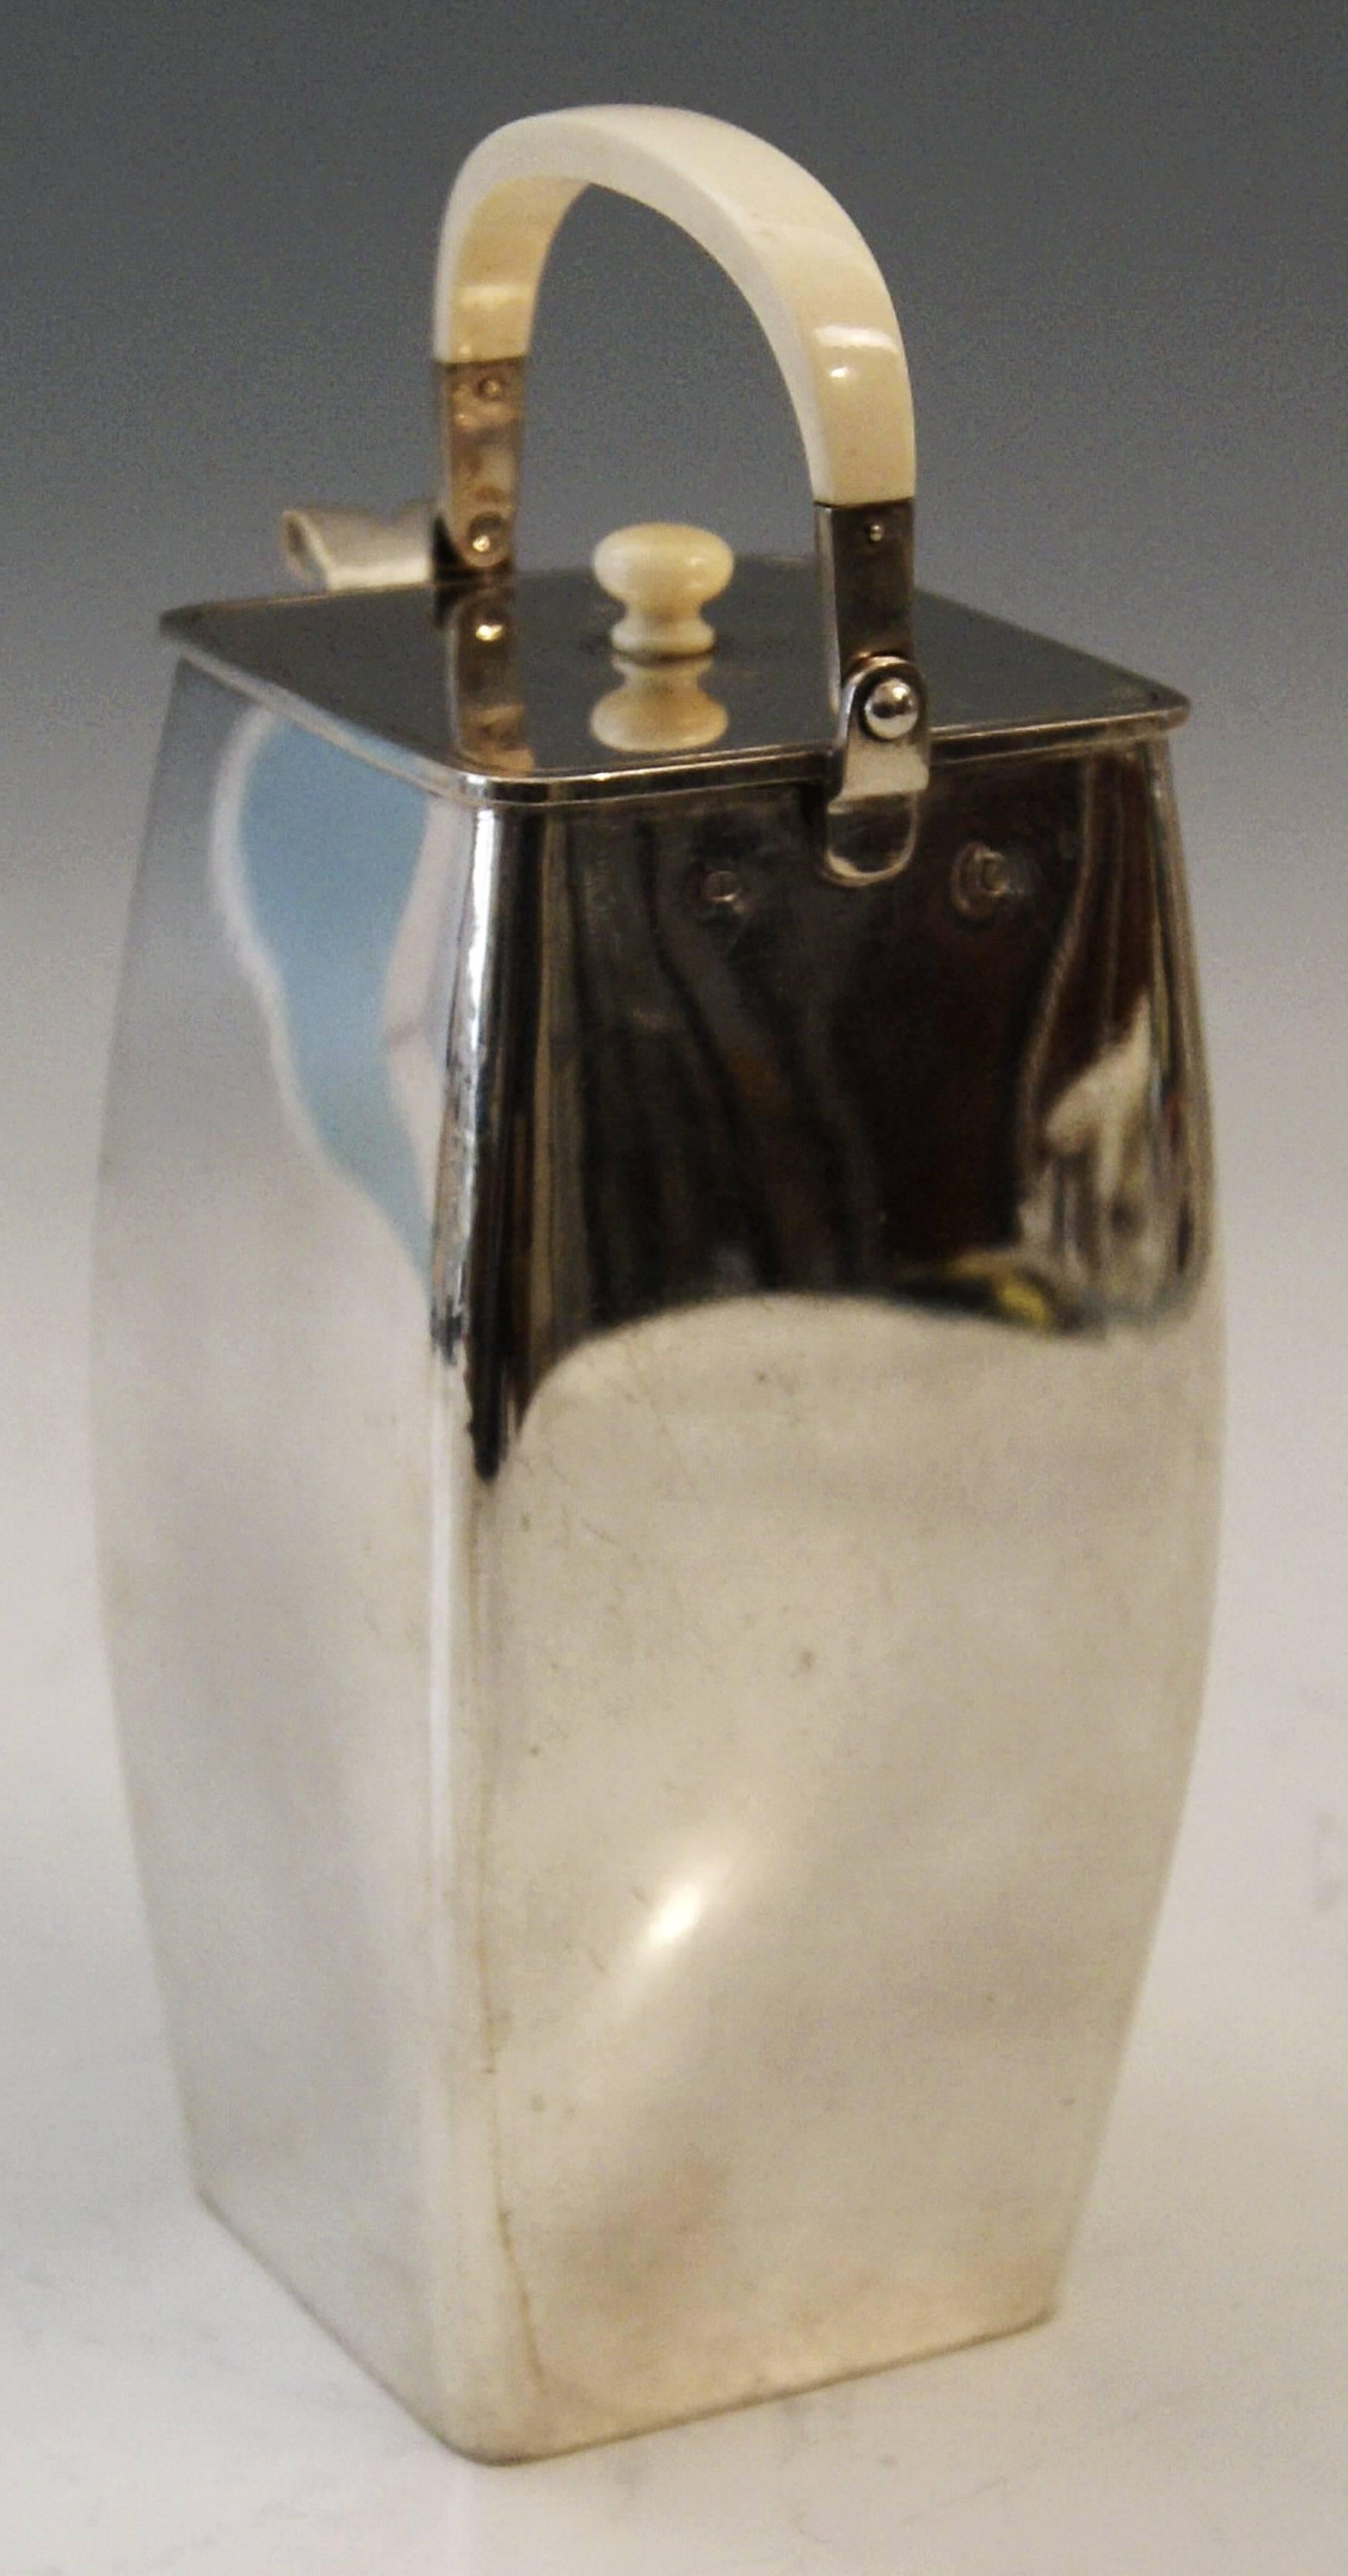 Silver most elegant chocolate pot with handle made of bone.
Art Nouveau Period made circa 1910.

Excellently made silver pot of finest quality.

The pot's form type is that of a tapering rectangular cuboid having been turned:
This most elegant